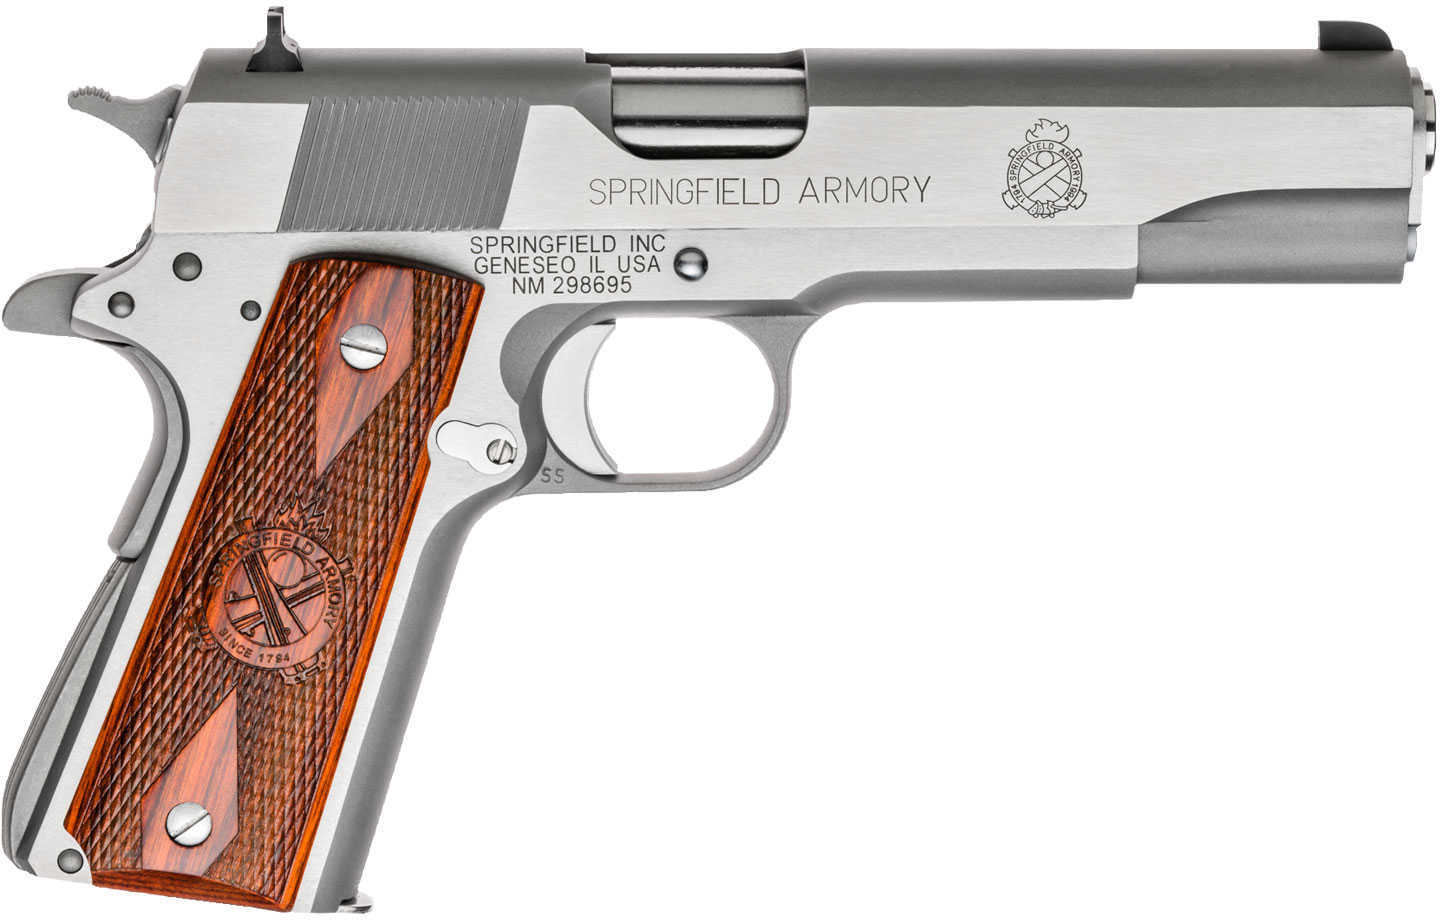 Springfield Armory 1911 Loaded 45 ACP 5'' Barrel 7 Round Cocobolo Wood Grip Stainless Steel Finish Semi Automatic Pistol